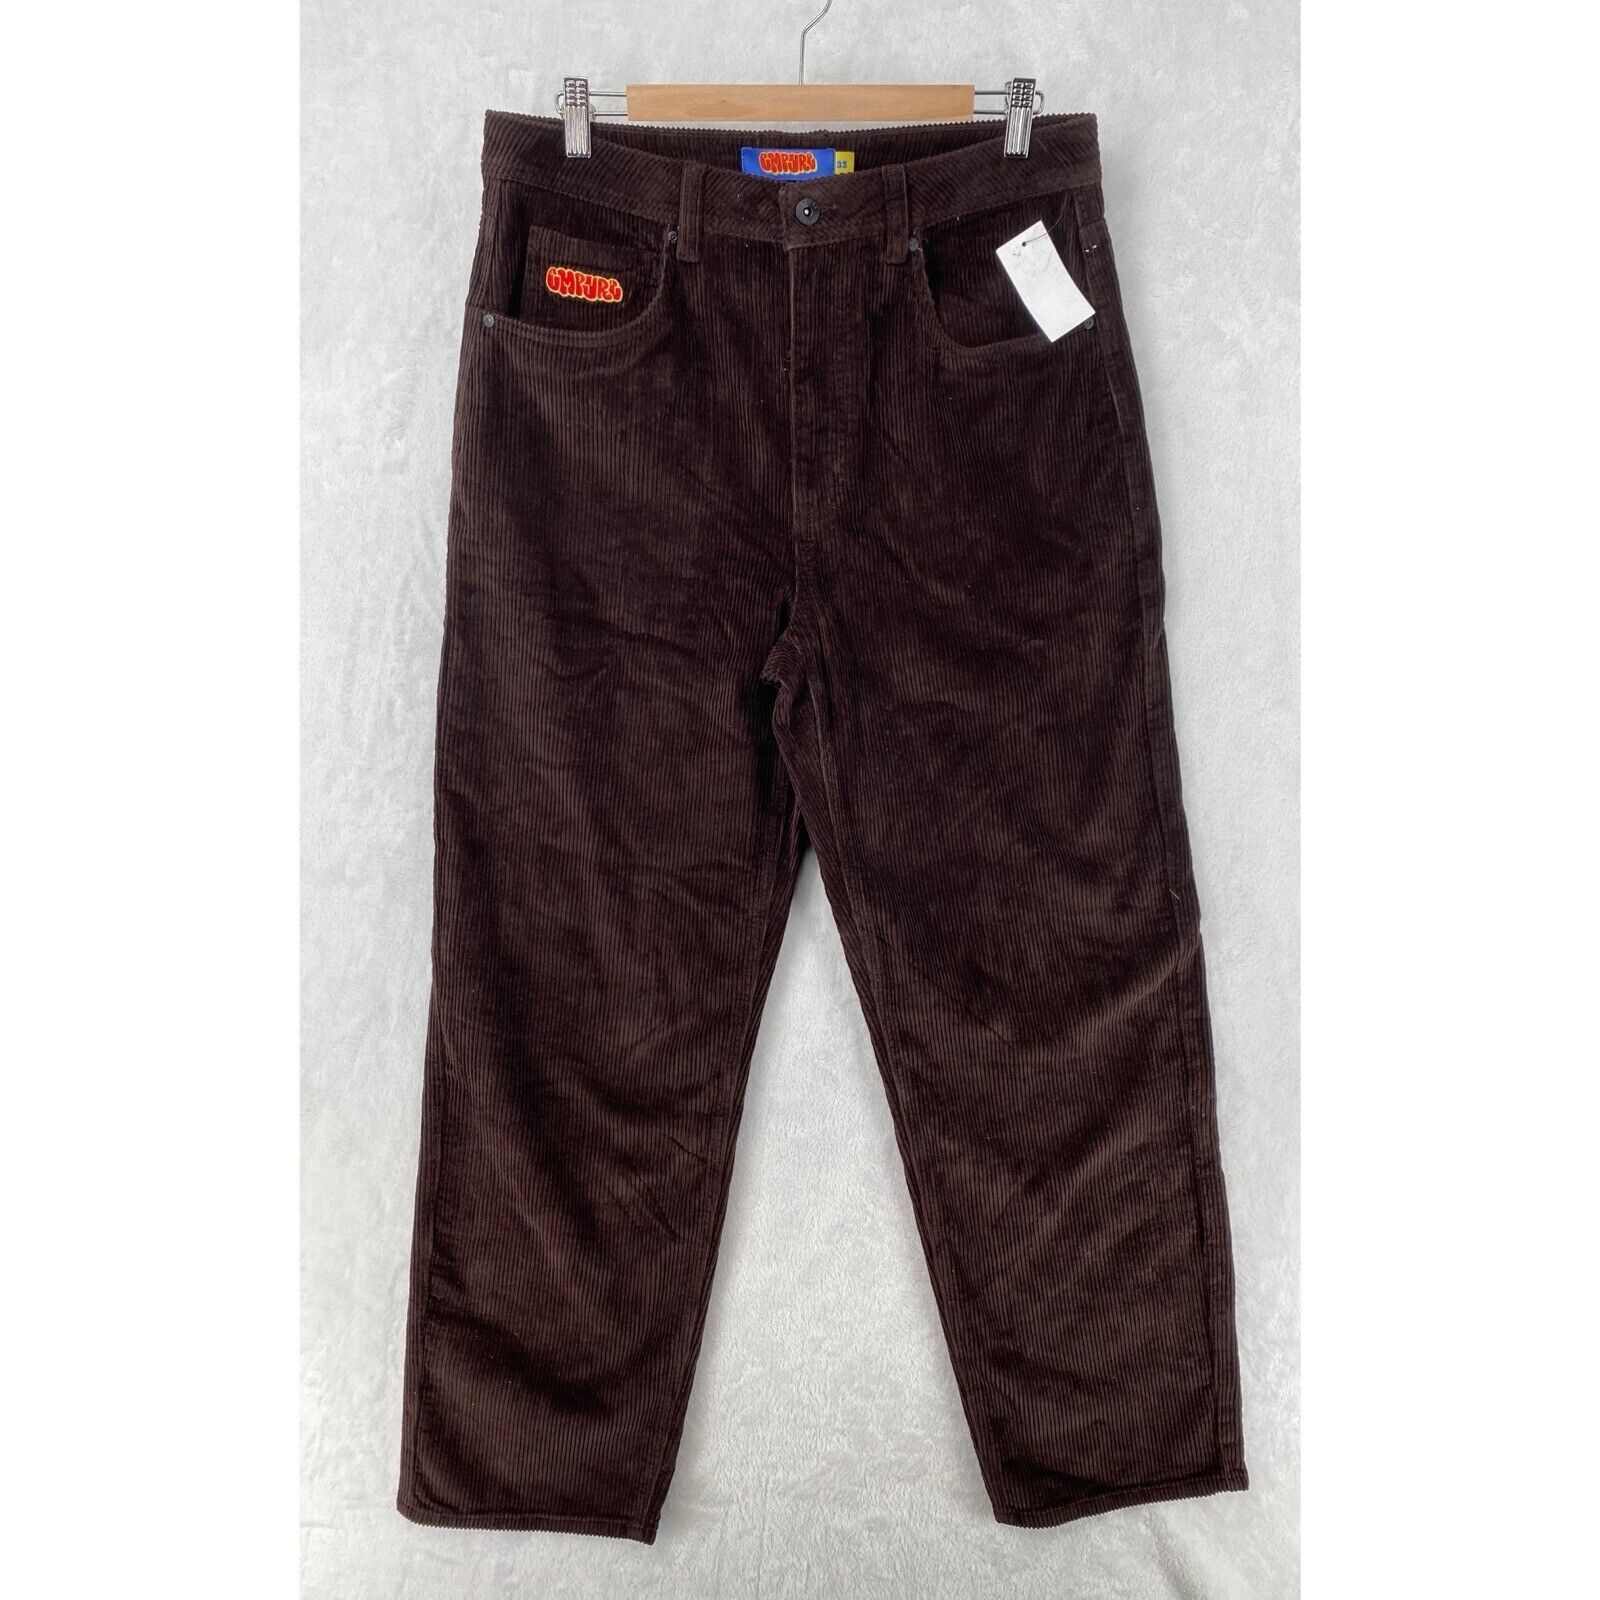 Empyre Pants Adult 32 Brown Java Loose Fit Sk8 Cord Corduroy Baggy Wide Leg NEW